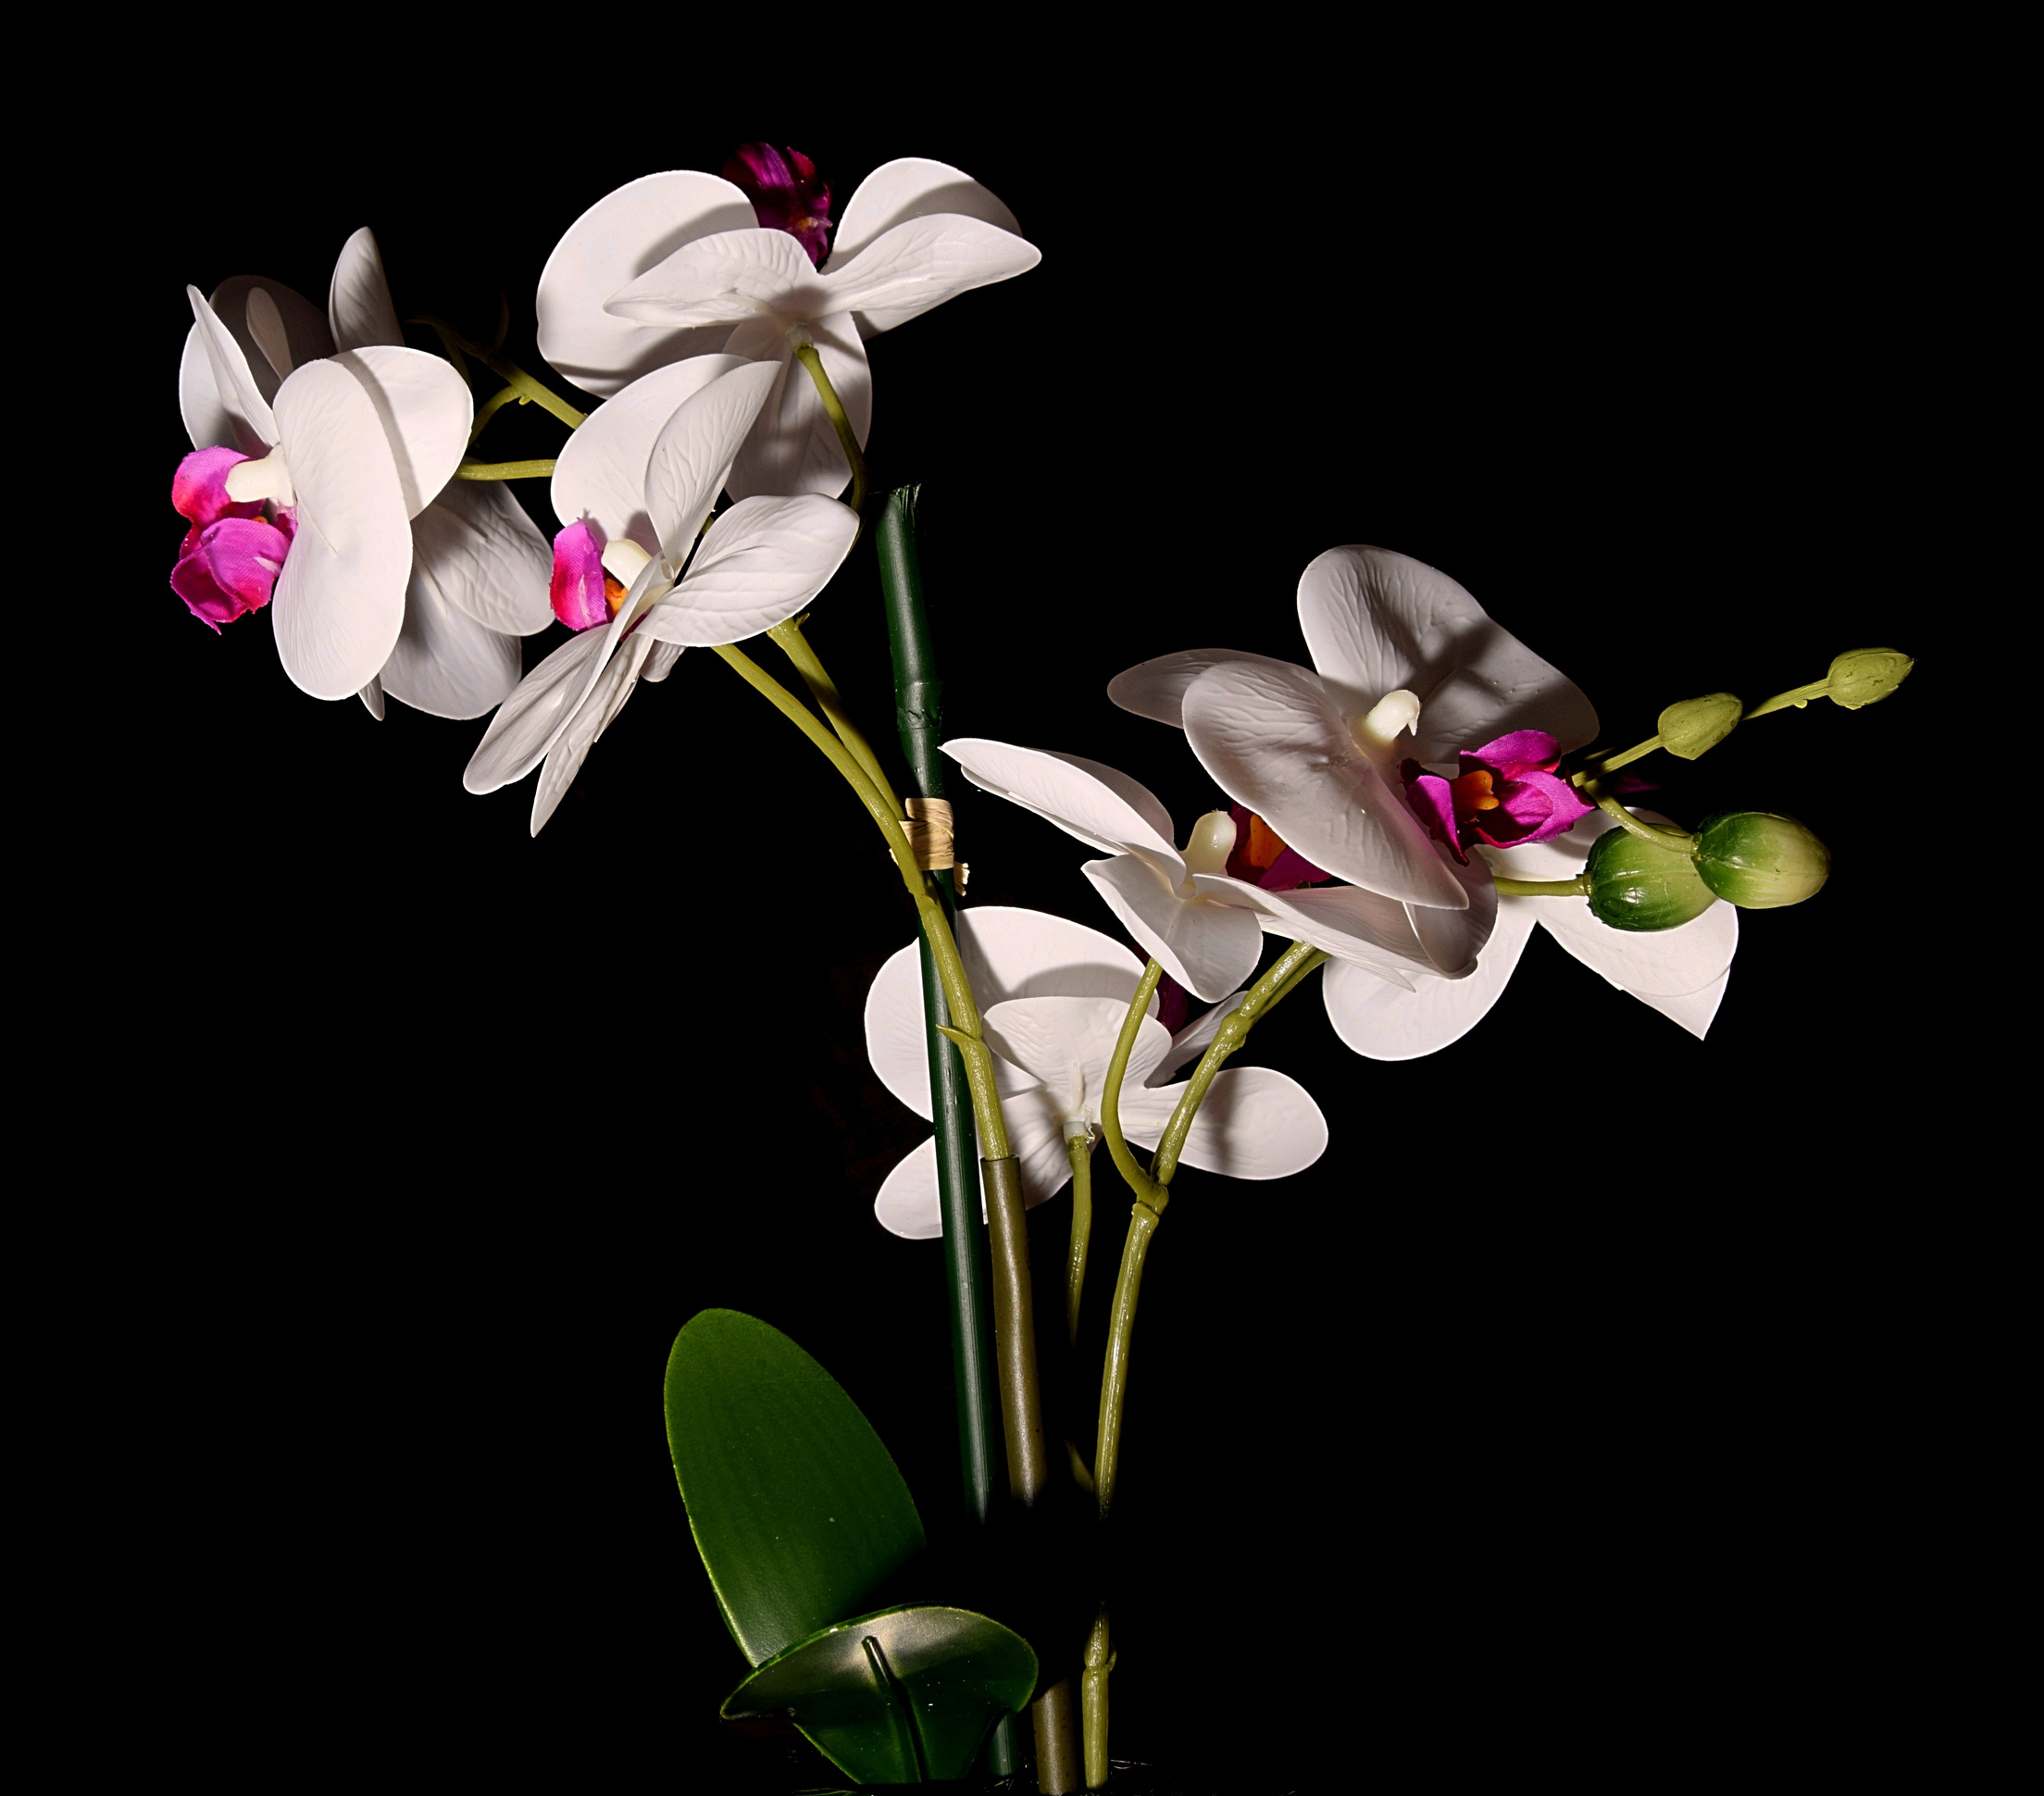 Orchid Flower in a Black Background